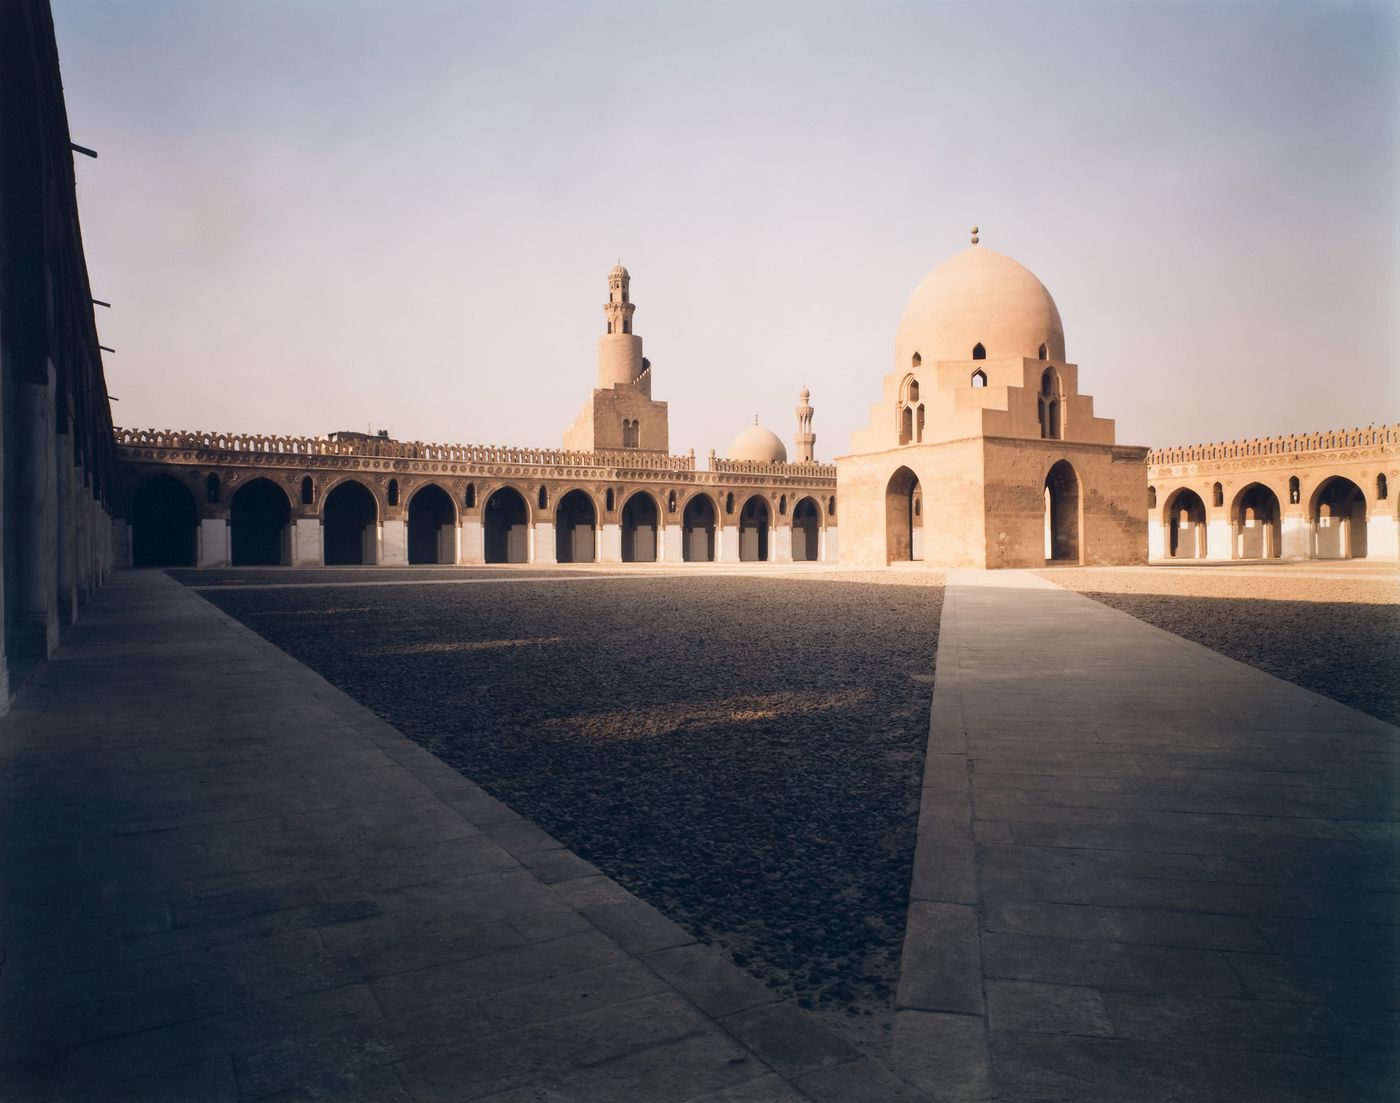 Mosque of Ibn Tulan, view of inner courtyard with two angled pathways converging in foreground, Cairo, Egypt